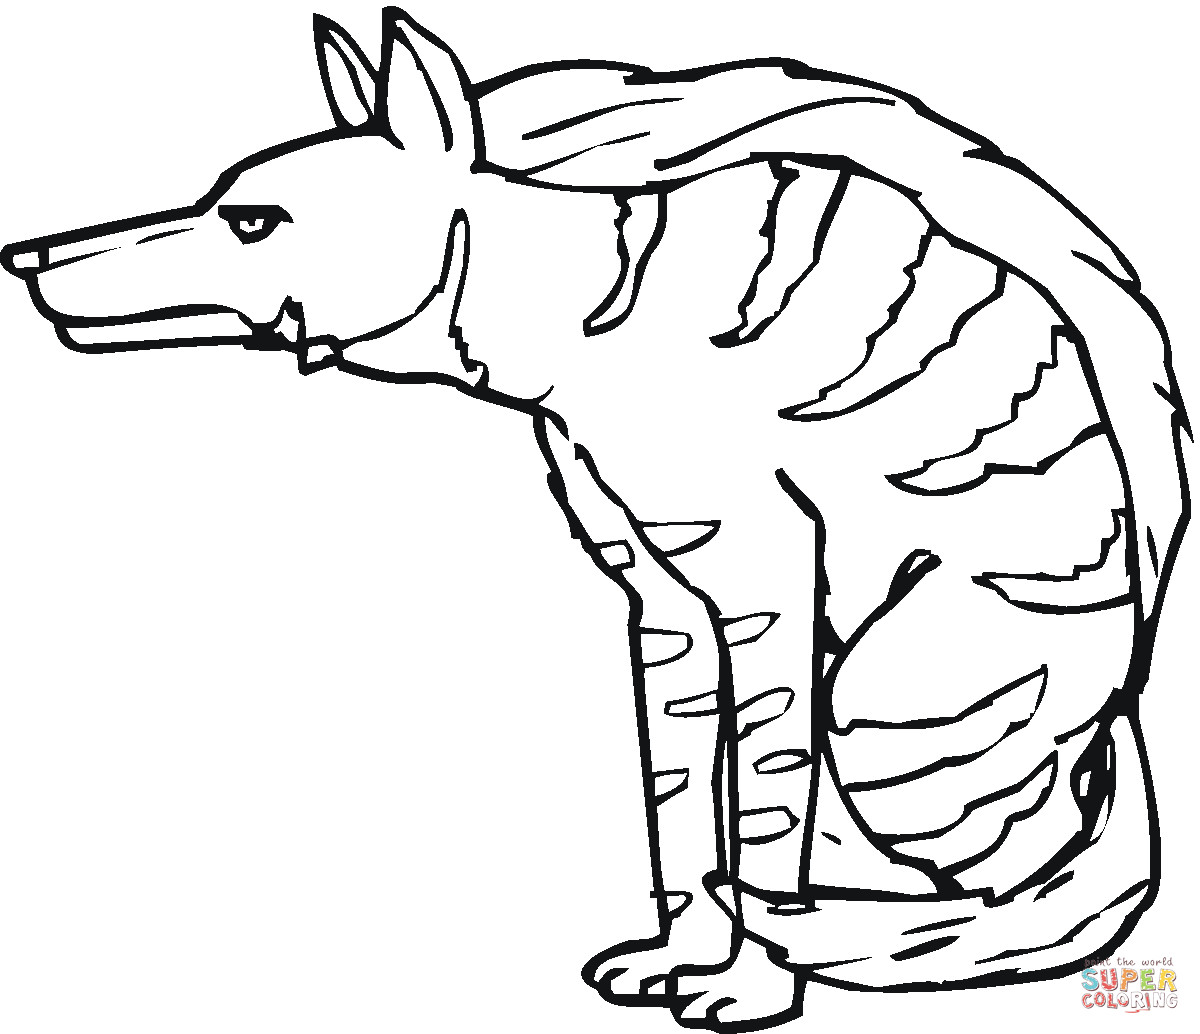 Hyena Coloring Pages
 Striped Hyena coloring page